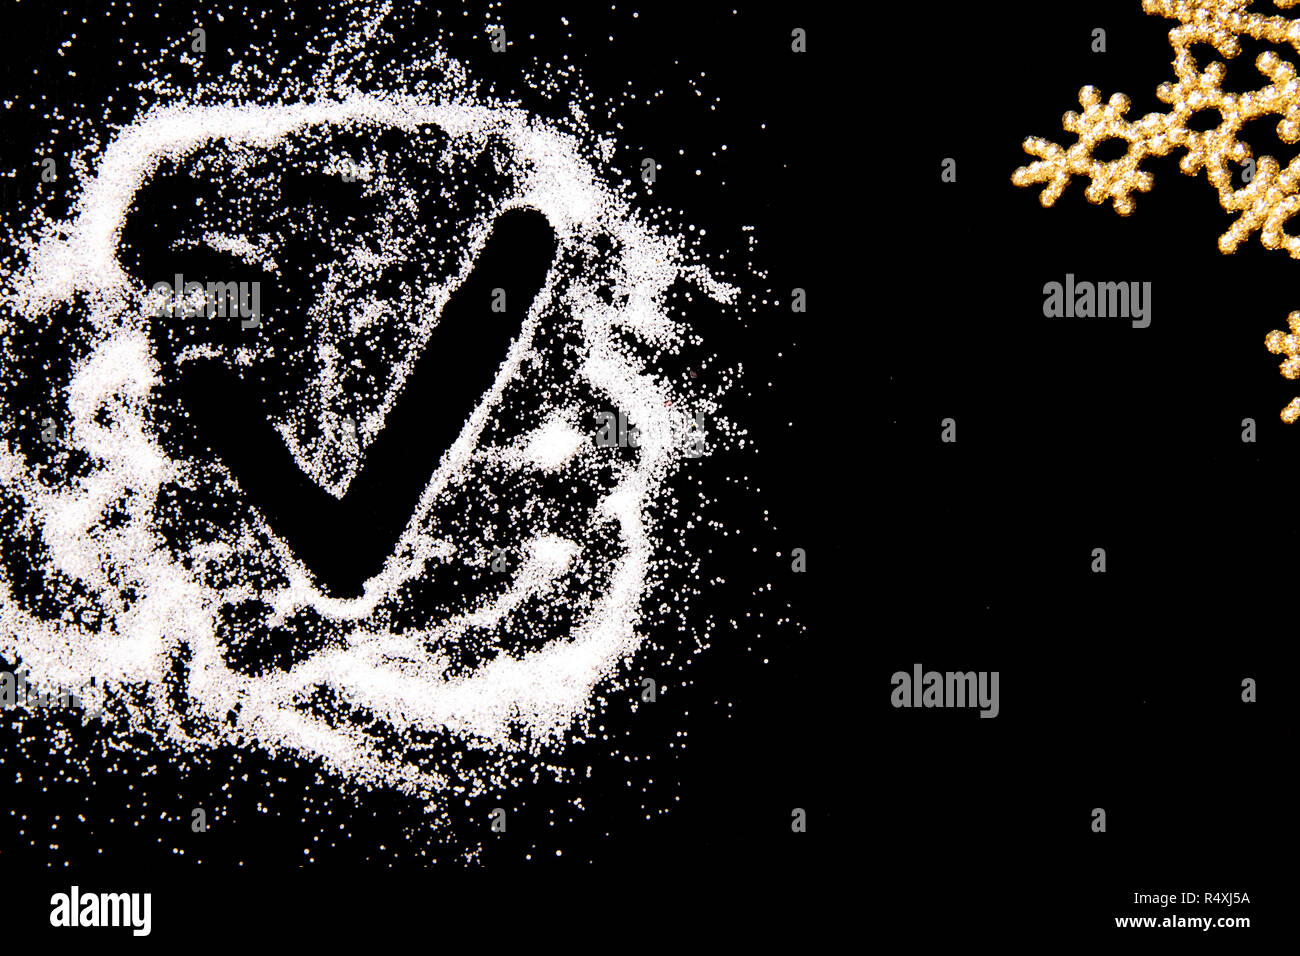 Checking mark symbol drawing by finger on white salt powder spot cloud on left side on black background. Golden snowflake in corner. New year and Christamas tick concept with place for text Copy space Stock Photo